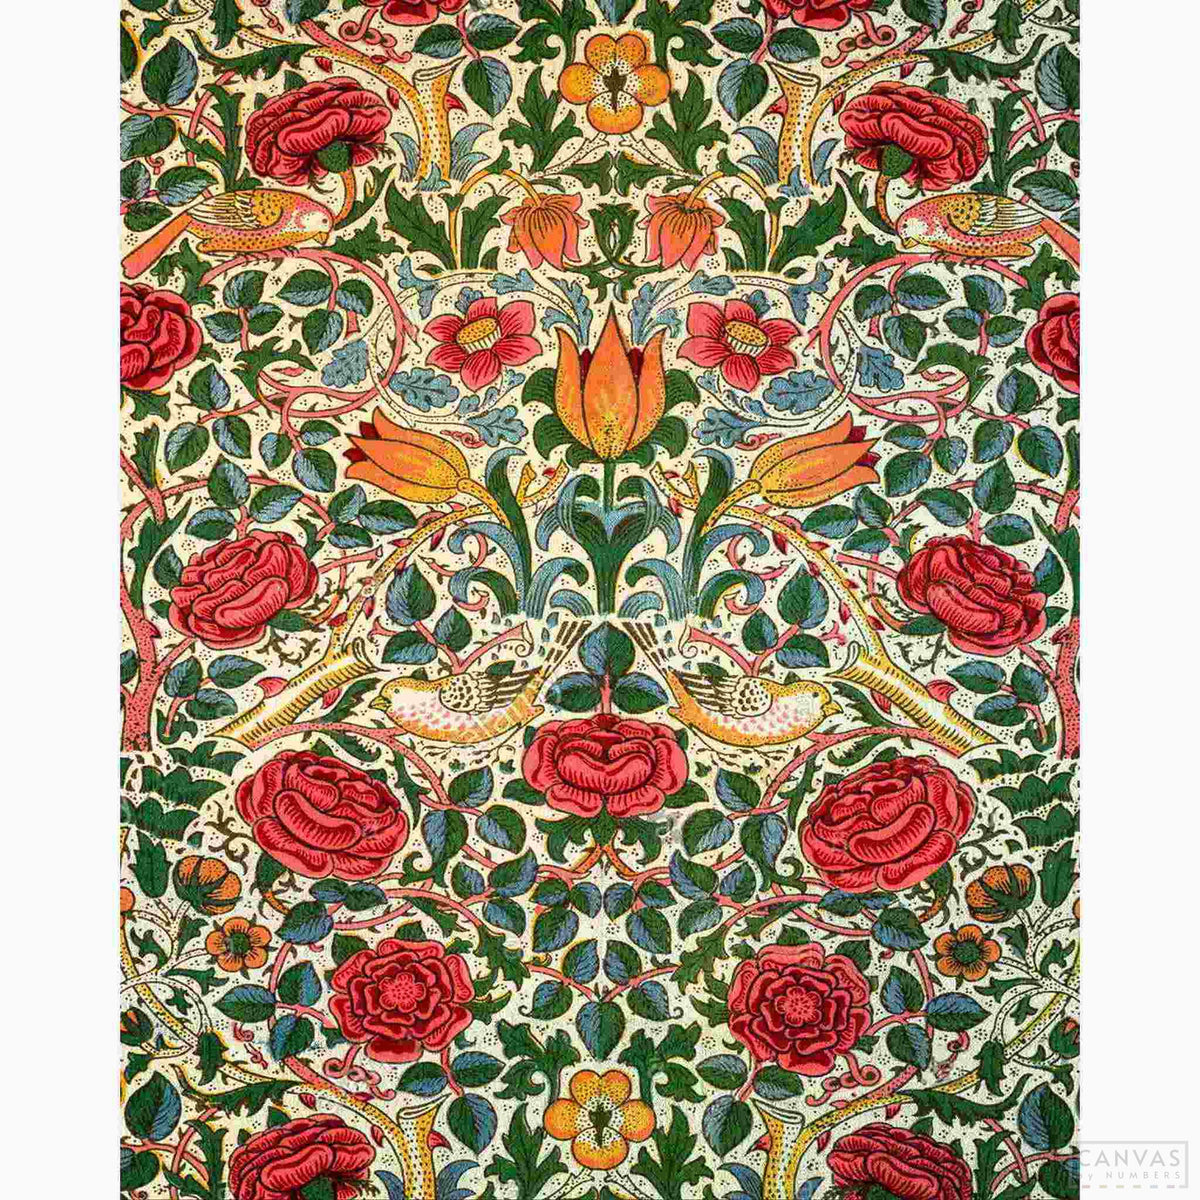 Rose - Diamond Painting-Create your own textile masterpiece with a diamond painting kit inspired by William Morris's Rose design. Ideal for crafters and art enthusiasts alike.-Canvas by Numbers